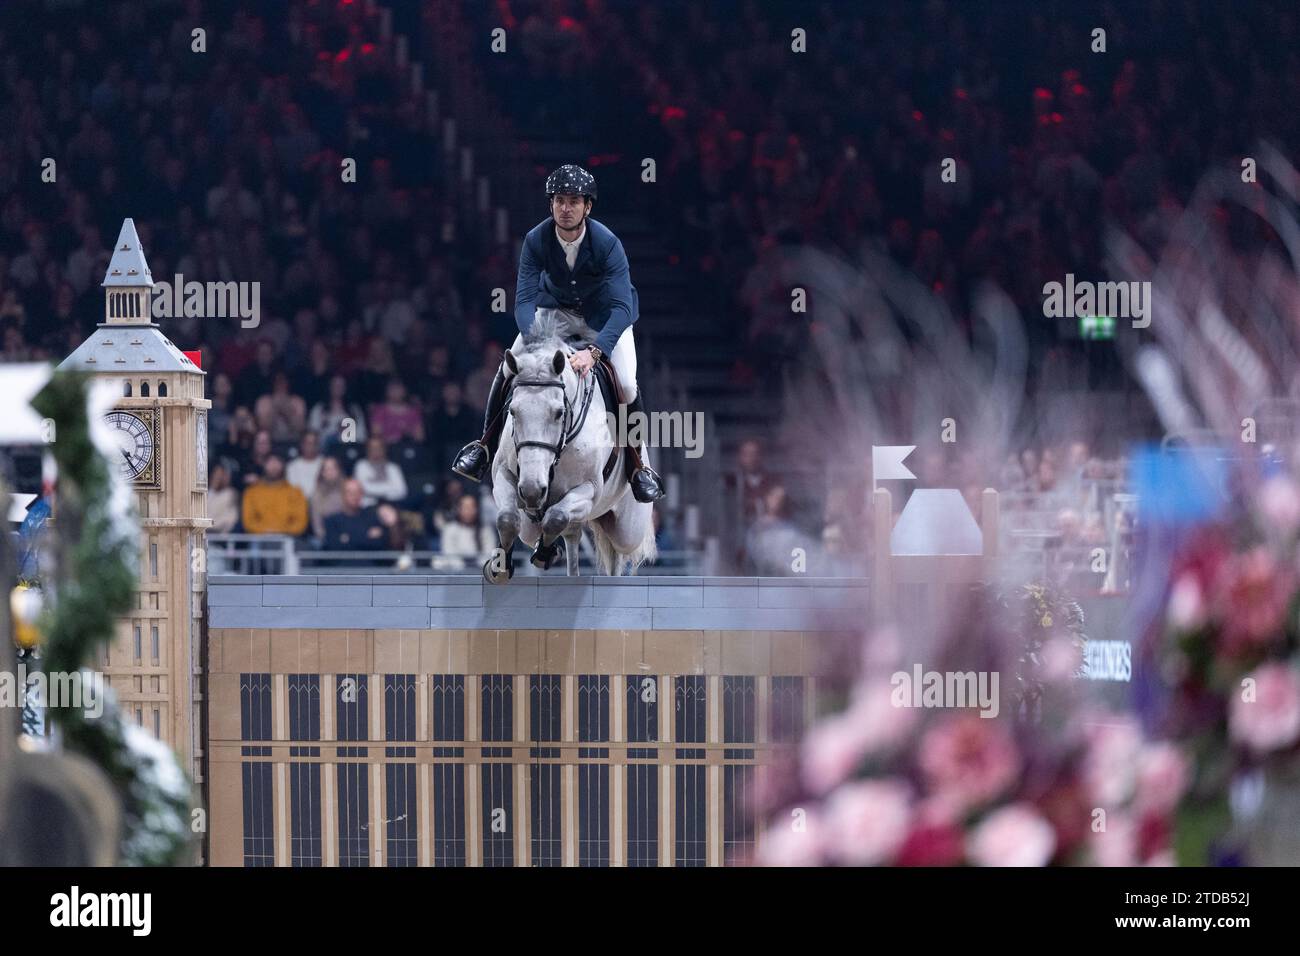 London, UK. December 17, 2023. Steve Guerdat of Switzerland with Is-Minka competing during the Longines FEI Jumping World Cup at the London International Horse Show on December 17, 2023, London Excel Centre, United Kingdom (Photo by Maxime David - MXIMD Pictures) Credit: MXIMD Pictures/Alamy Live News Stock Photo